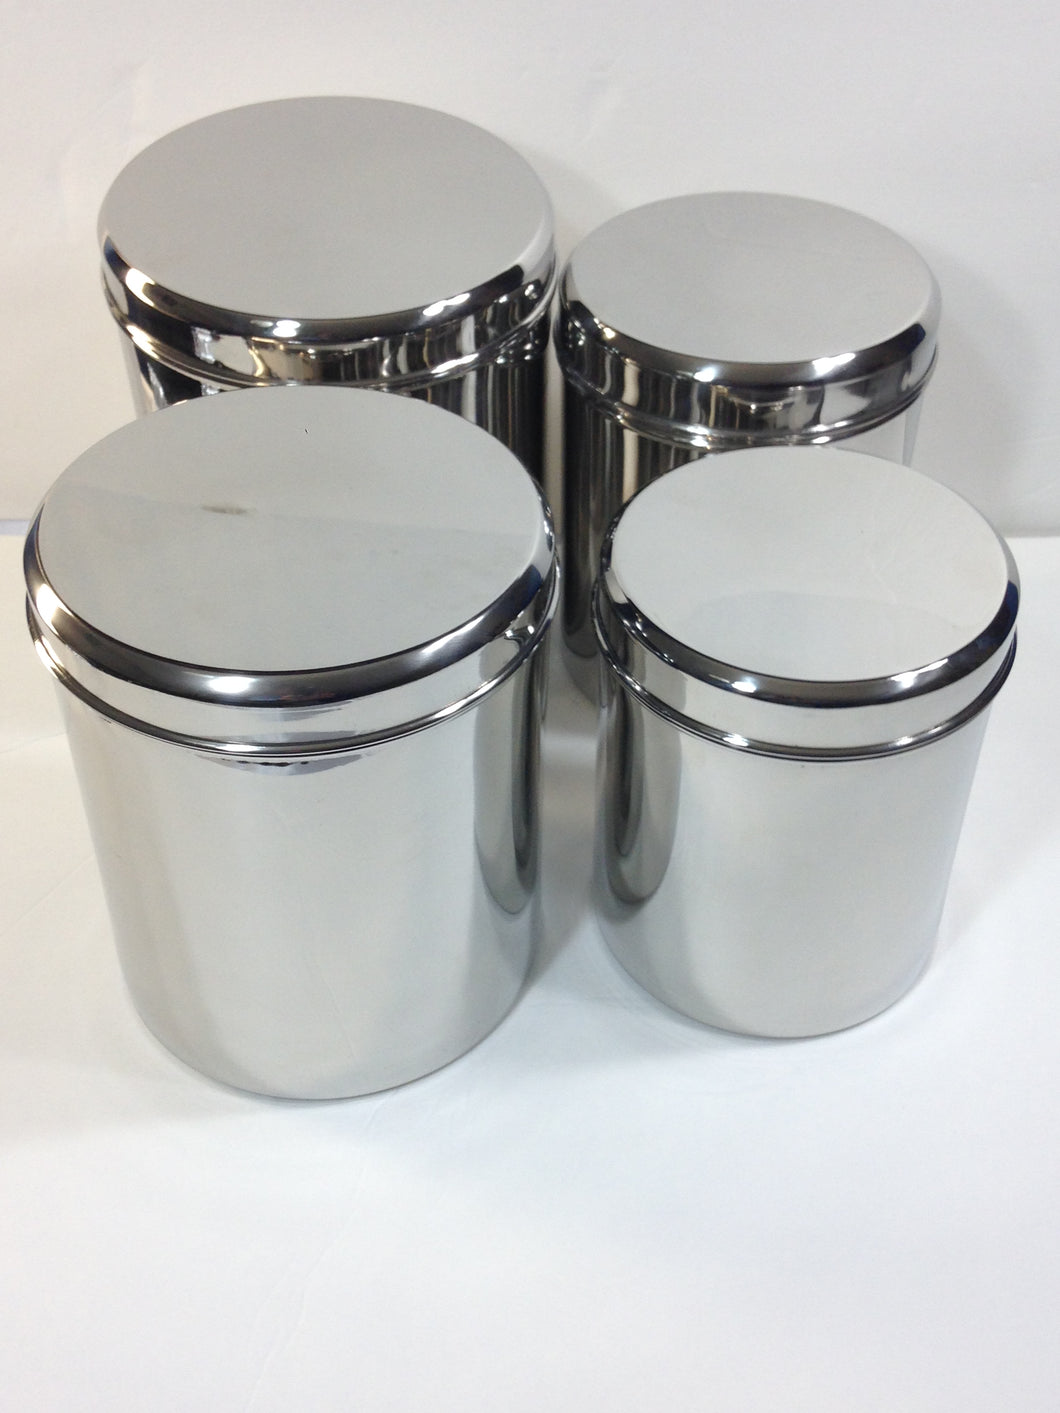 Kitchen Canister Set Stainless Steel Food Storage Flour Sugar Silver  Container